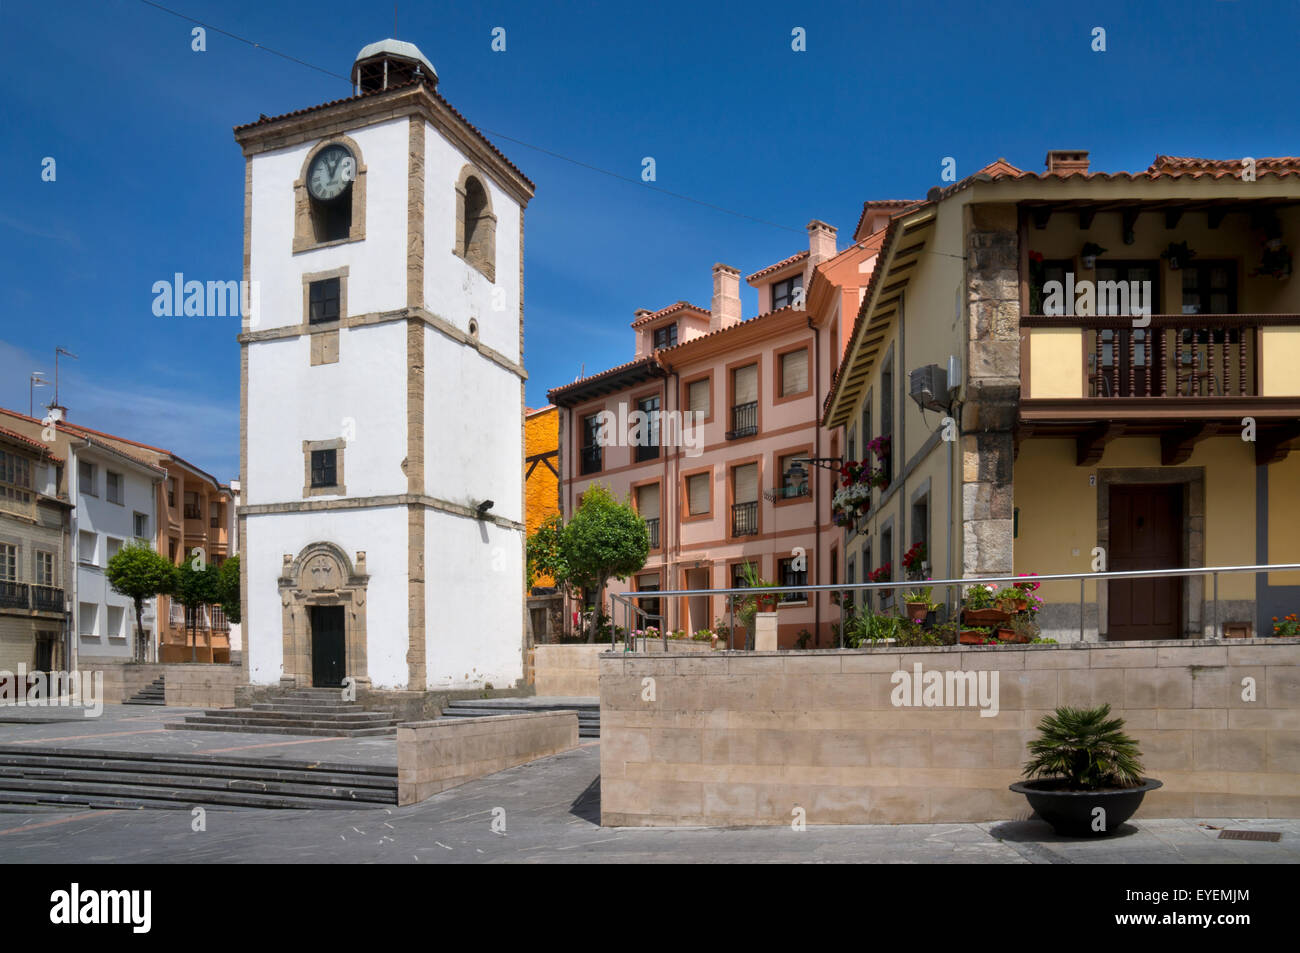 Clock tower and town square in Luanco,Asturias,Northern Spain Stock Photo